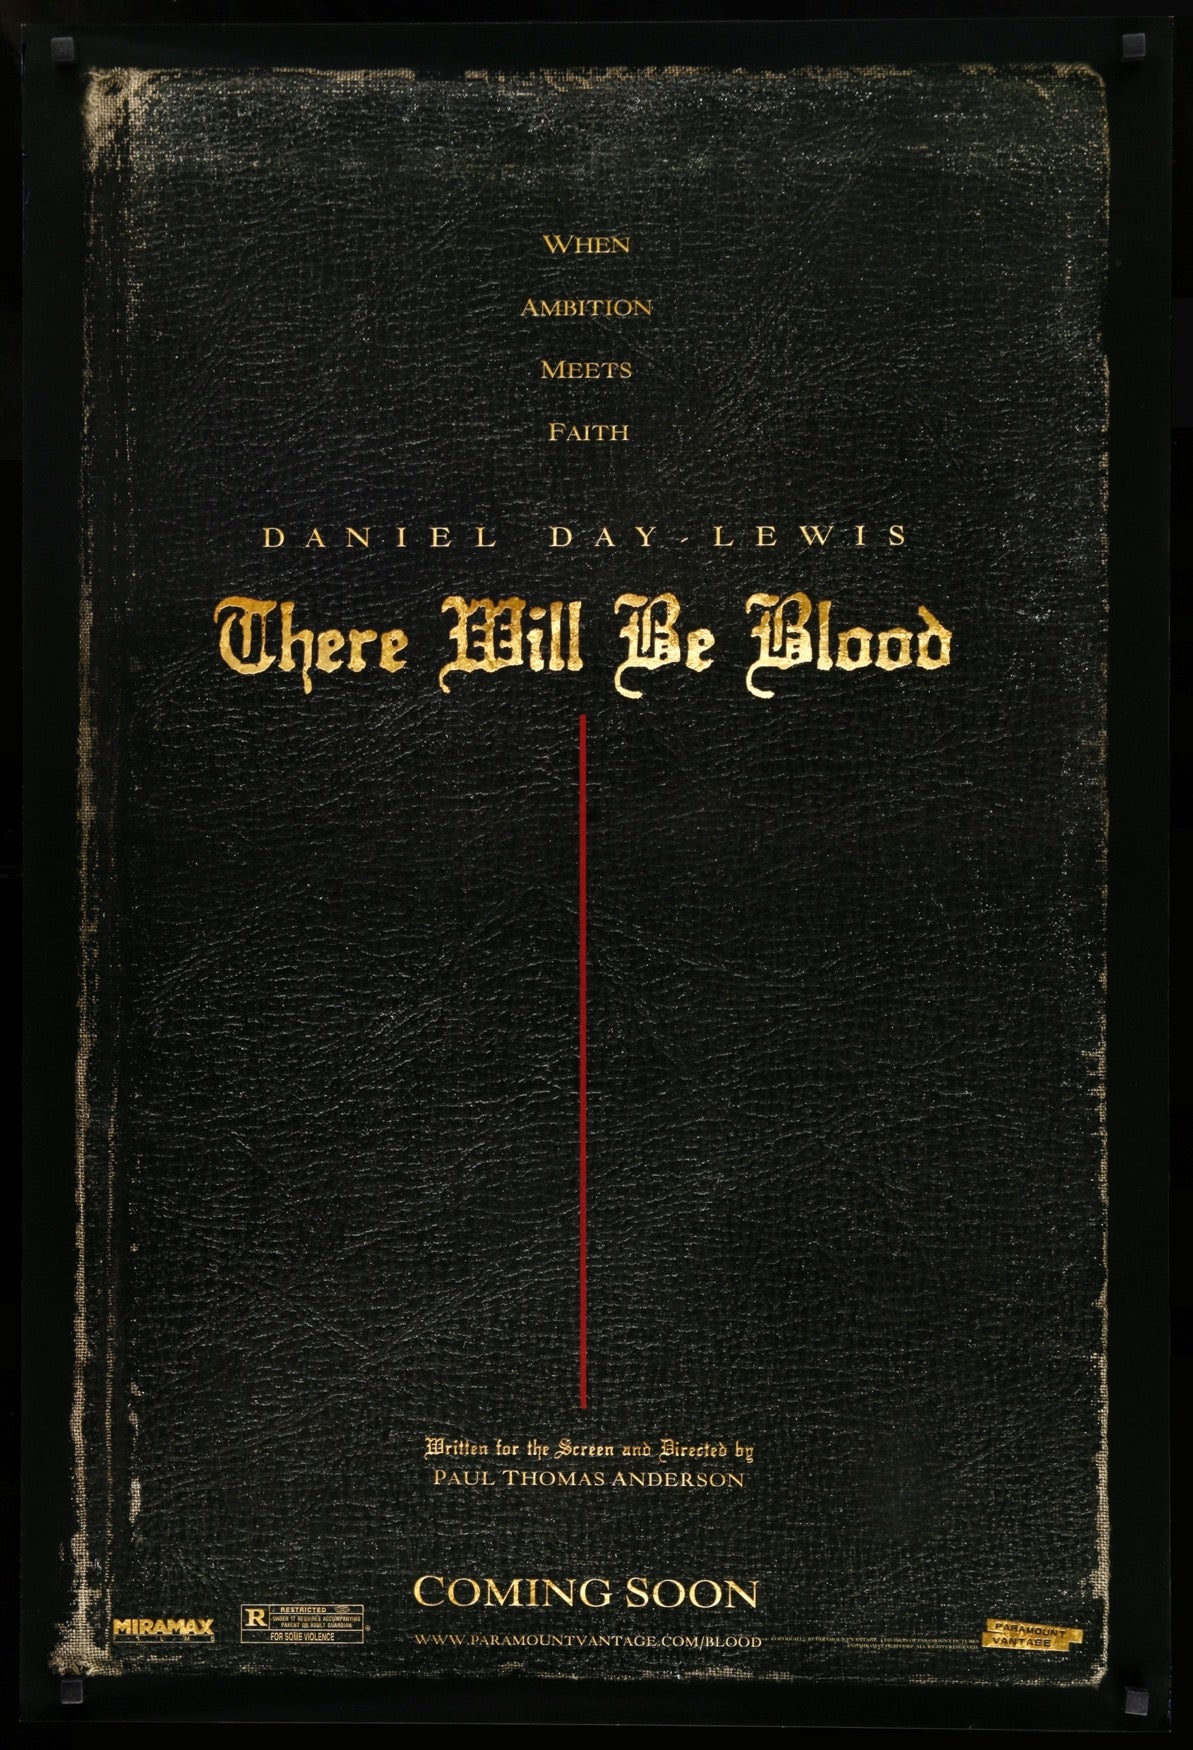 There Will Be Blood (2007) original movie poster for sale at Original Film Art